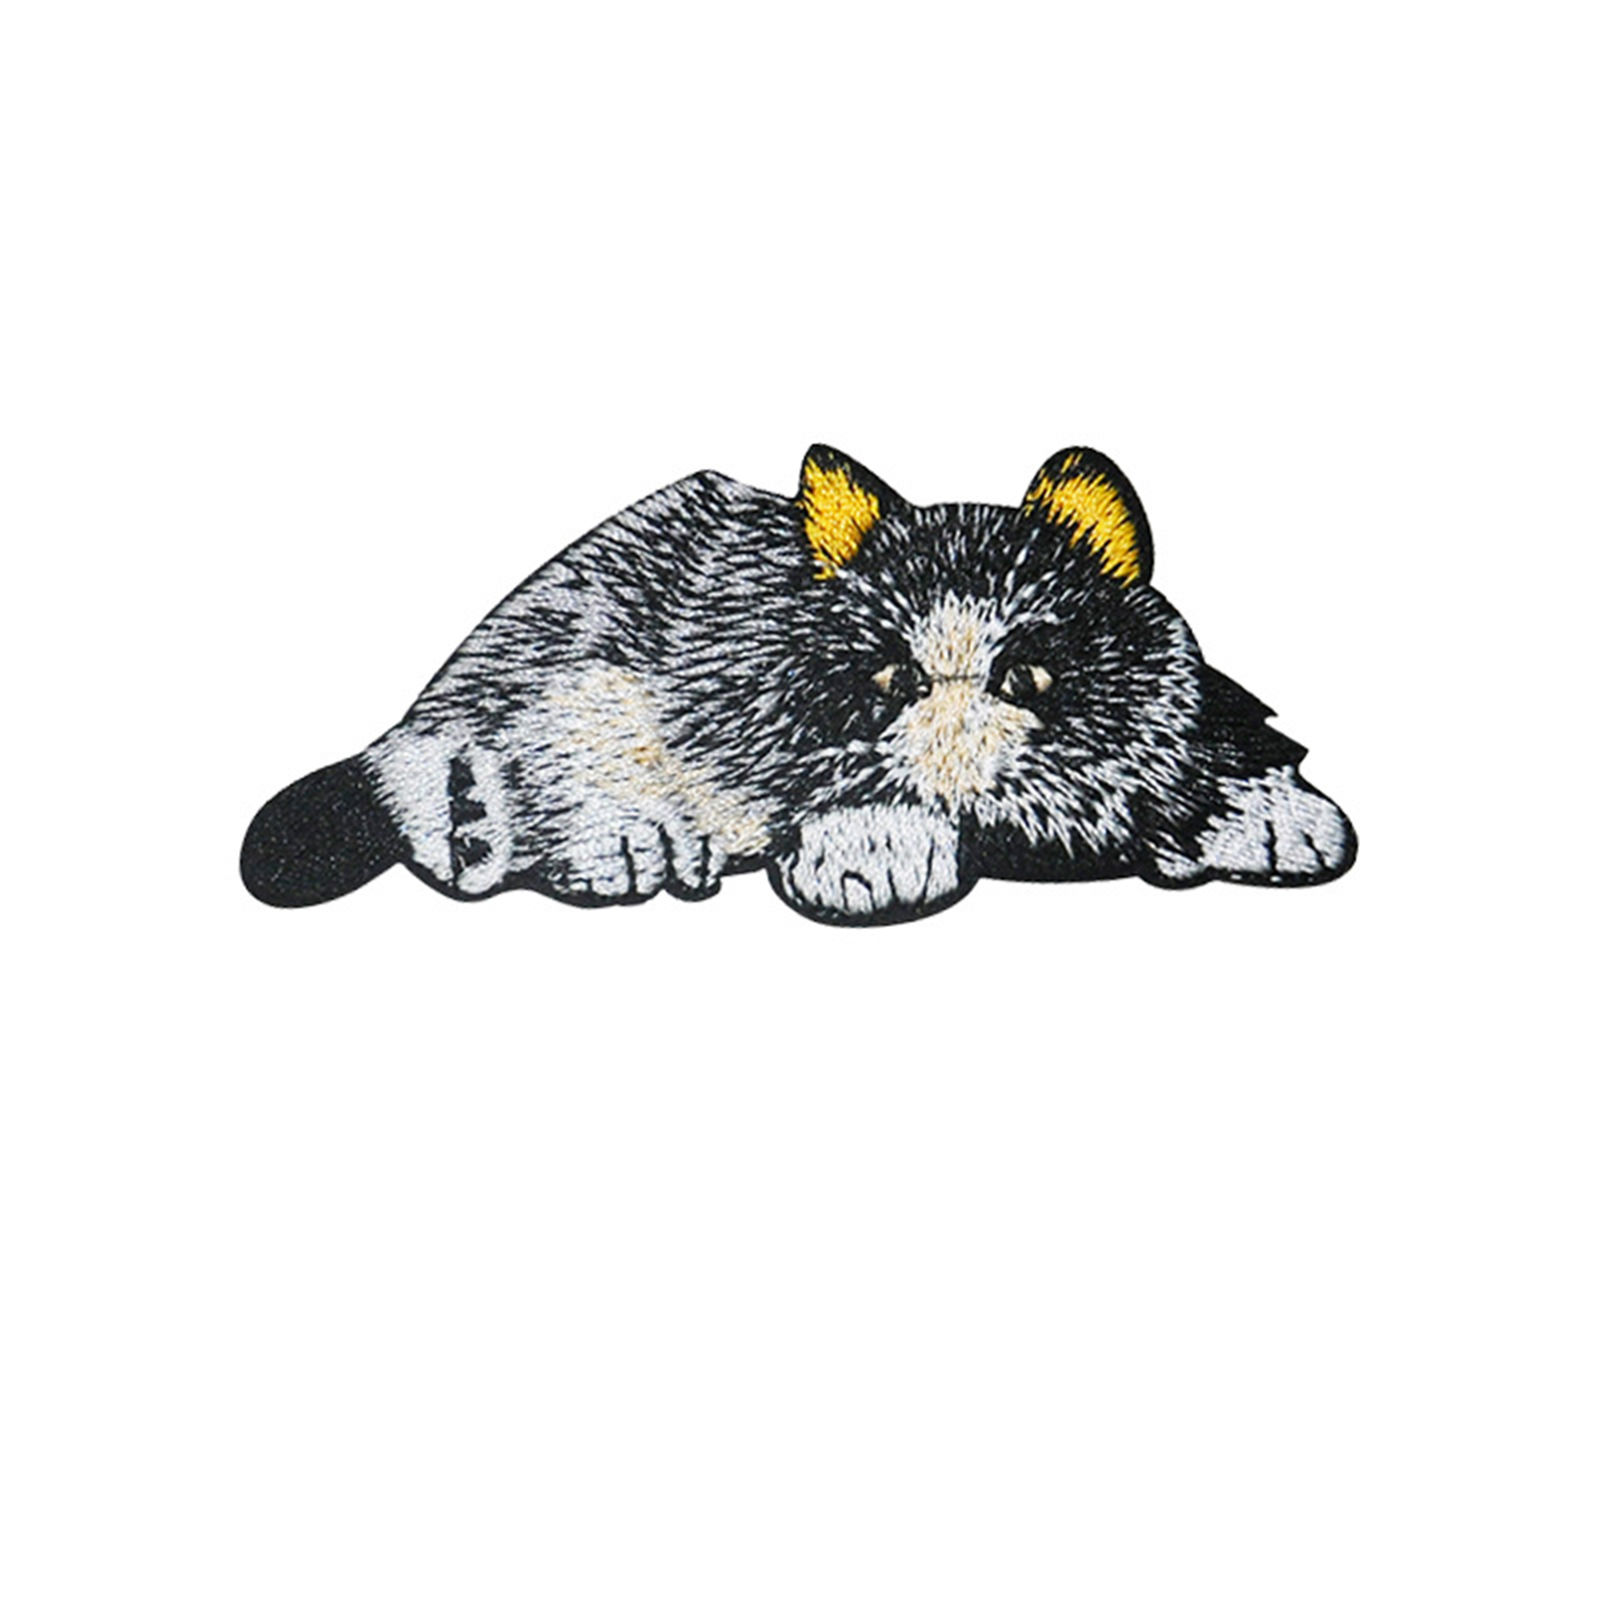 Picture of Polyester Iron On Patches Appliques (With Glue Back) Craft Black & White Cat Animal 8.5cm x 3.5cm, 5 PCs